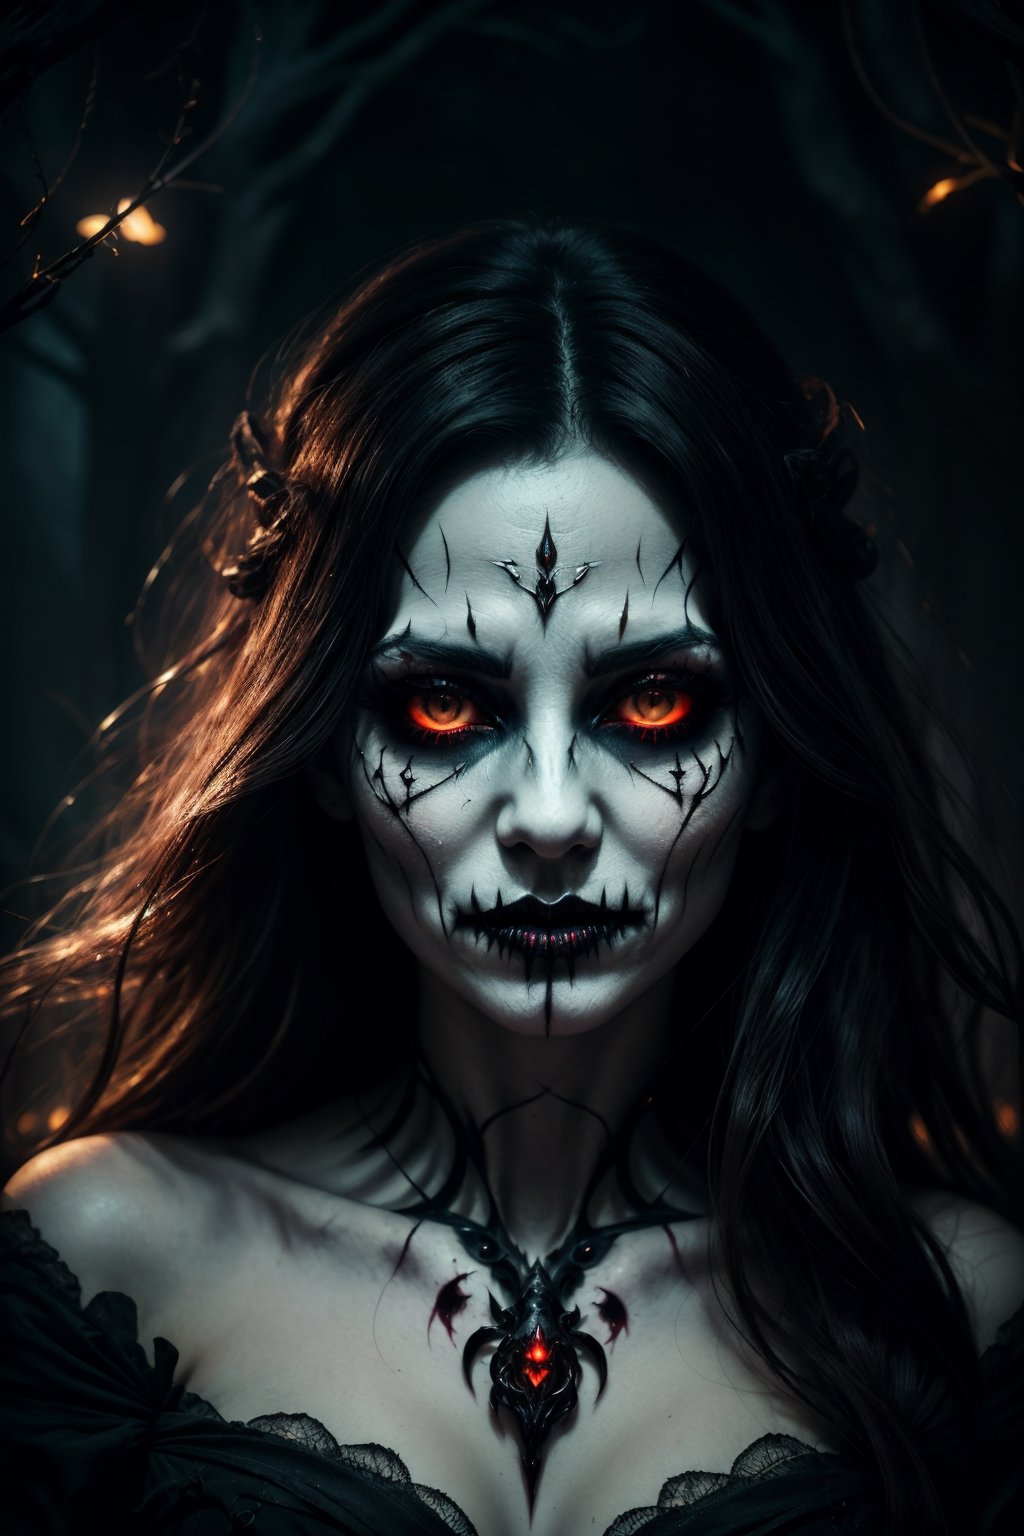 (best quality,4k,8k,highres,masterpiece:1.2),ultra-detailed,(realistic,photorealistic,photo-realistic:1.37),halloween, blood witcher, fair, hell, skeleton, vampire, demon, blood demon, spooky, creepy, fancy costume, dangers look, close-up, portrait, dark forest, misty atmosphere, glowing eyes, pale skin, smoke effects, moonlight, eerie shadows, sinister grin, gothic elements, haunting presence, mystical aura, enchanting beauty, macabre elegance, otherworldly charm, hair flowing in the wind, intense stare, blood-red lips, ethereal lighting, mysterious background, ominous fog, witchcraft symbols, supernatural powers, hauntingly beautiful, chilling vibes, menacing atmosphere, twisted branches, tangled vines, eerie silence, bone-chilling expression, ghostly appearance, piercing gaze, hauntingly pale complexion, secret incantations, unearthly presence, mystical transformations, spectral energy, supernatural allure, blood-stained garments, hair standing on end, spine-tingling sensation, sinister enchantress, midnight rituals
